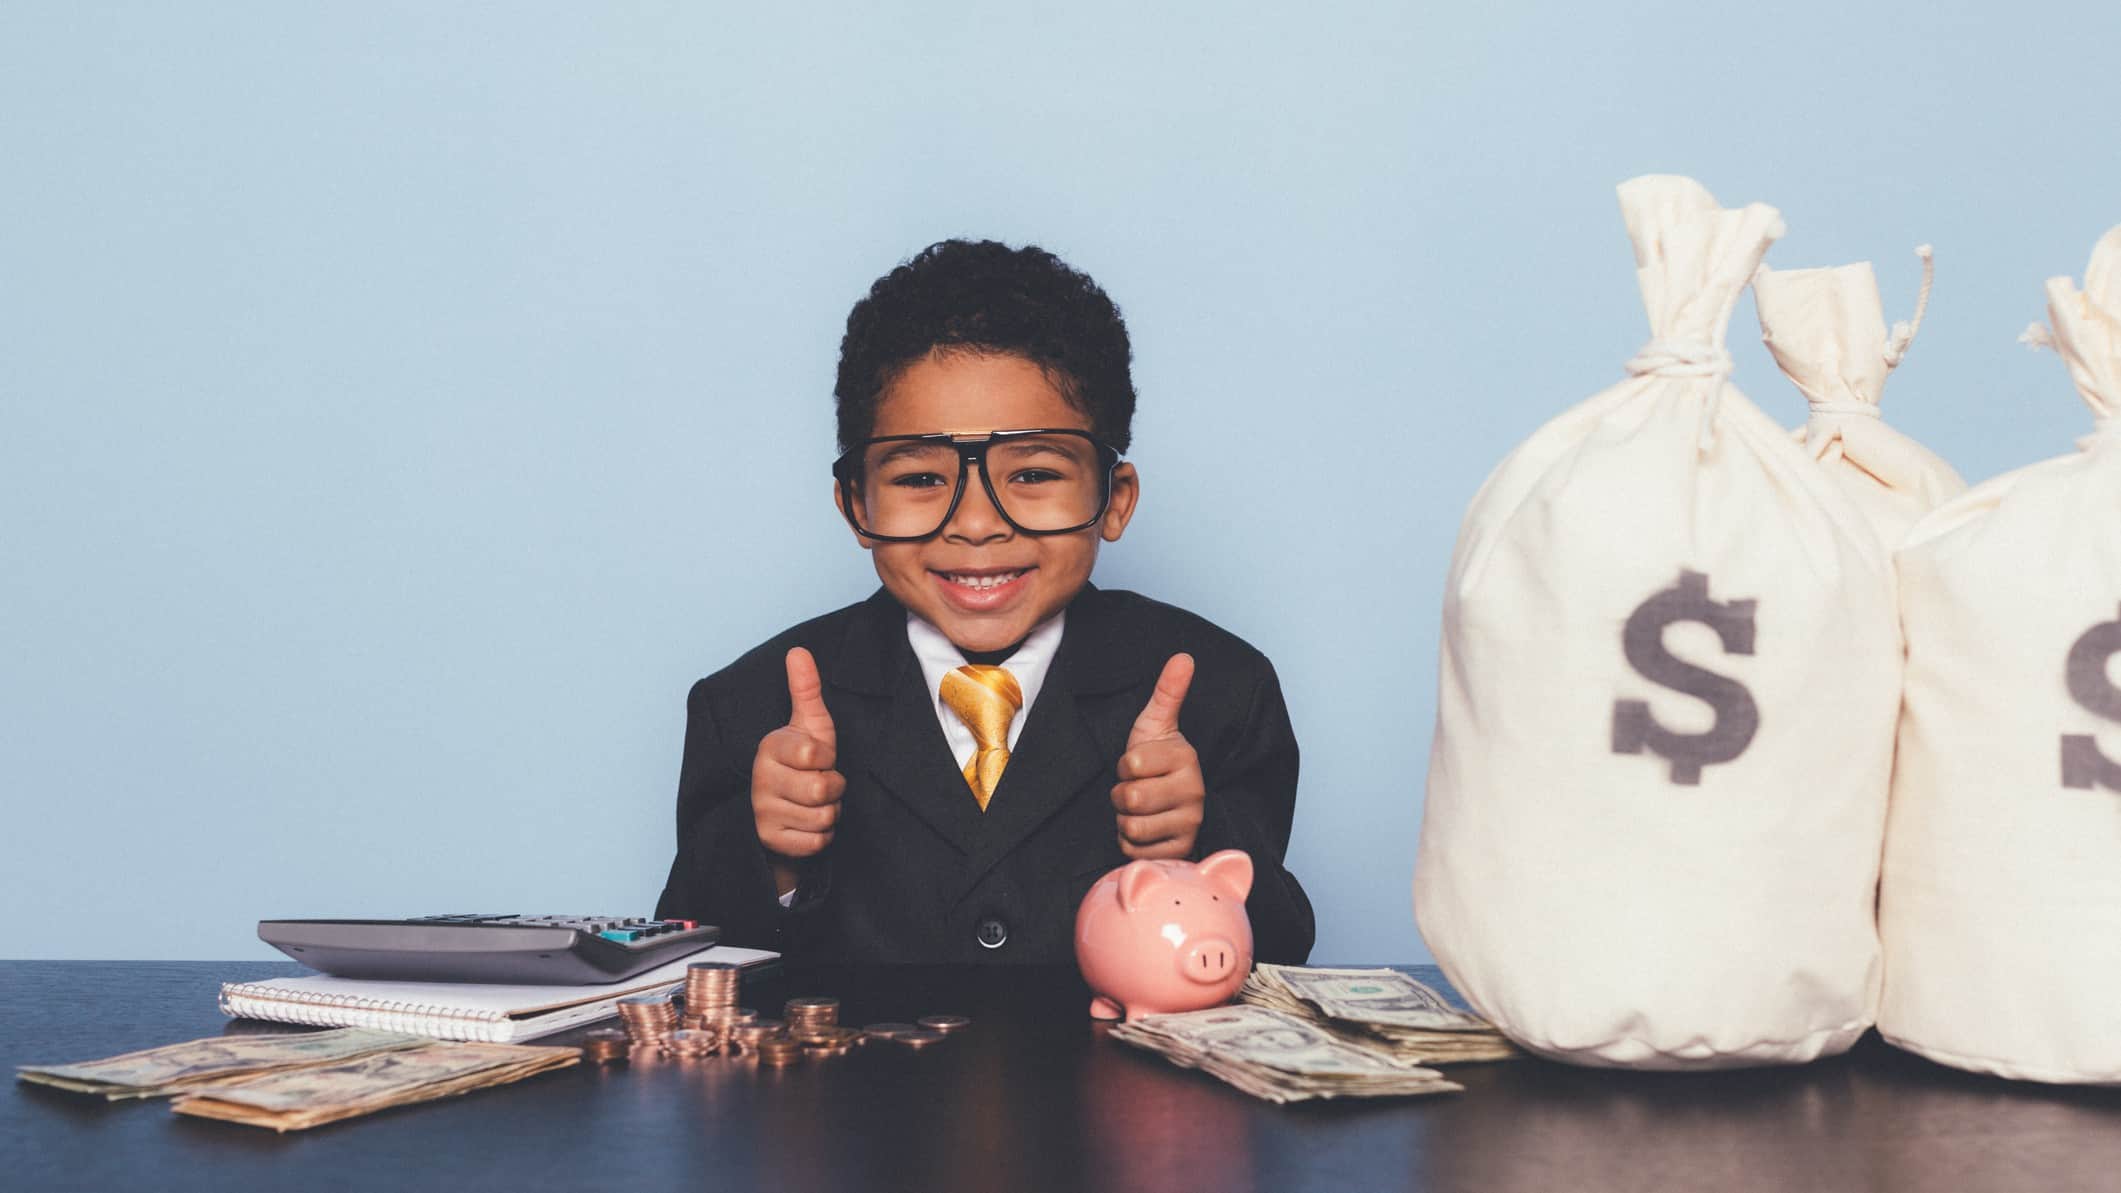 a happy child dressed in full business suit gives the thumbs up sign while sitting at a desk featuring a piggy bank and a sack of money with a dollar sign on it.